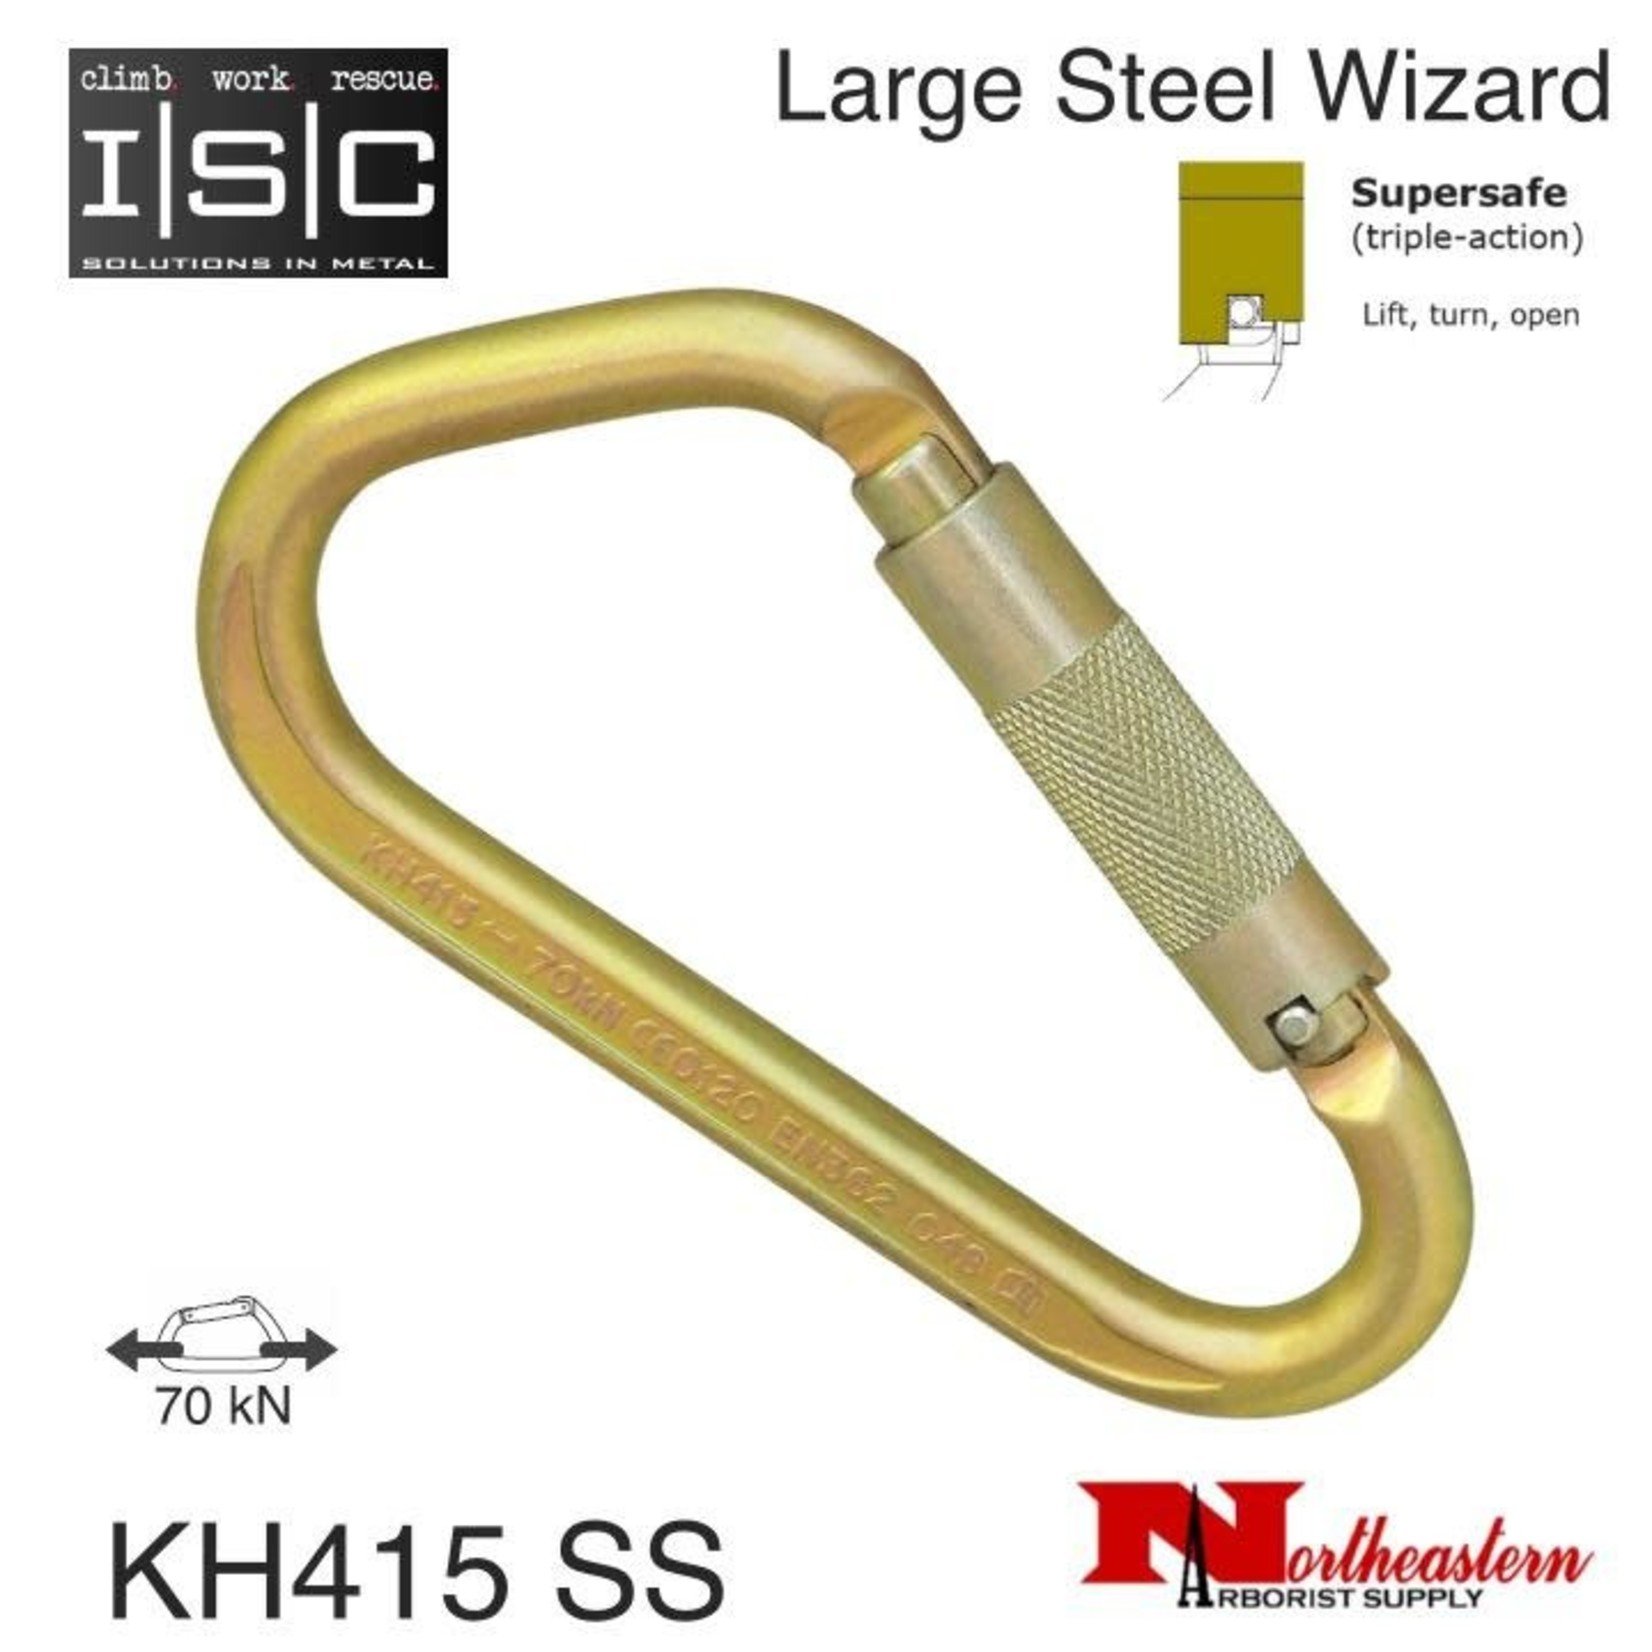 ISC Carabiner Large Iron Wizard 70Kn Mbs Supersafe, Kh415